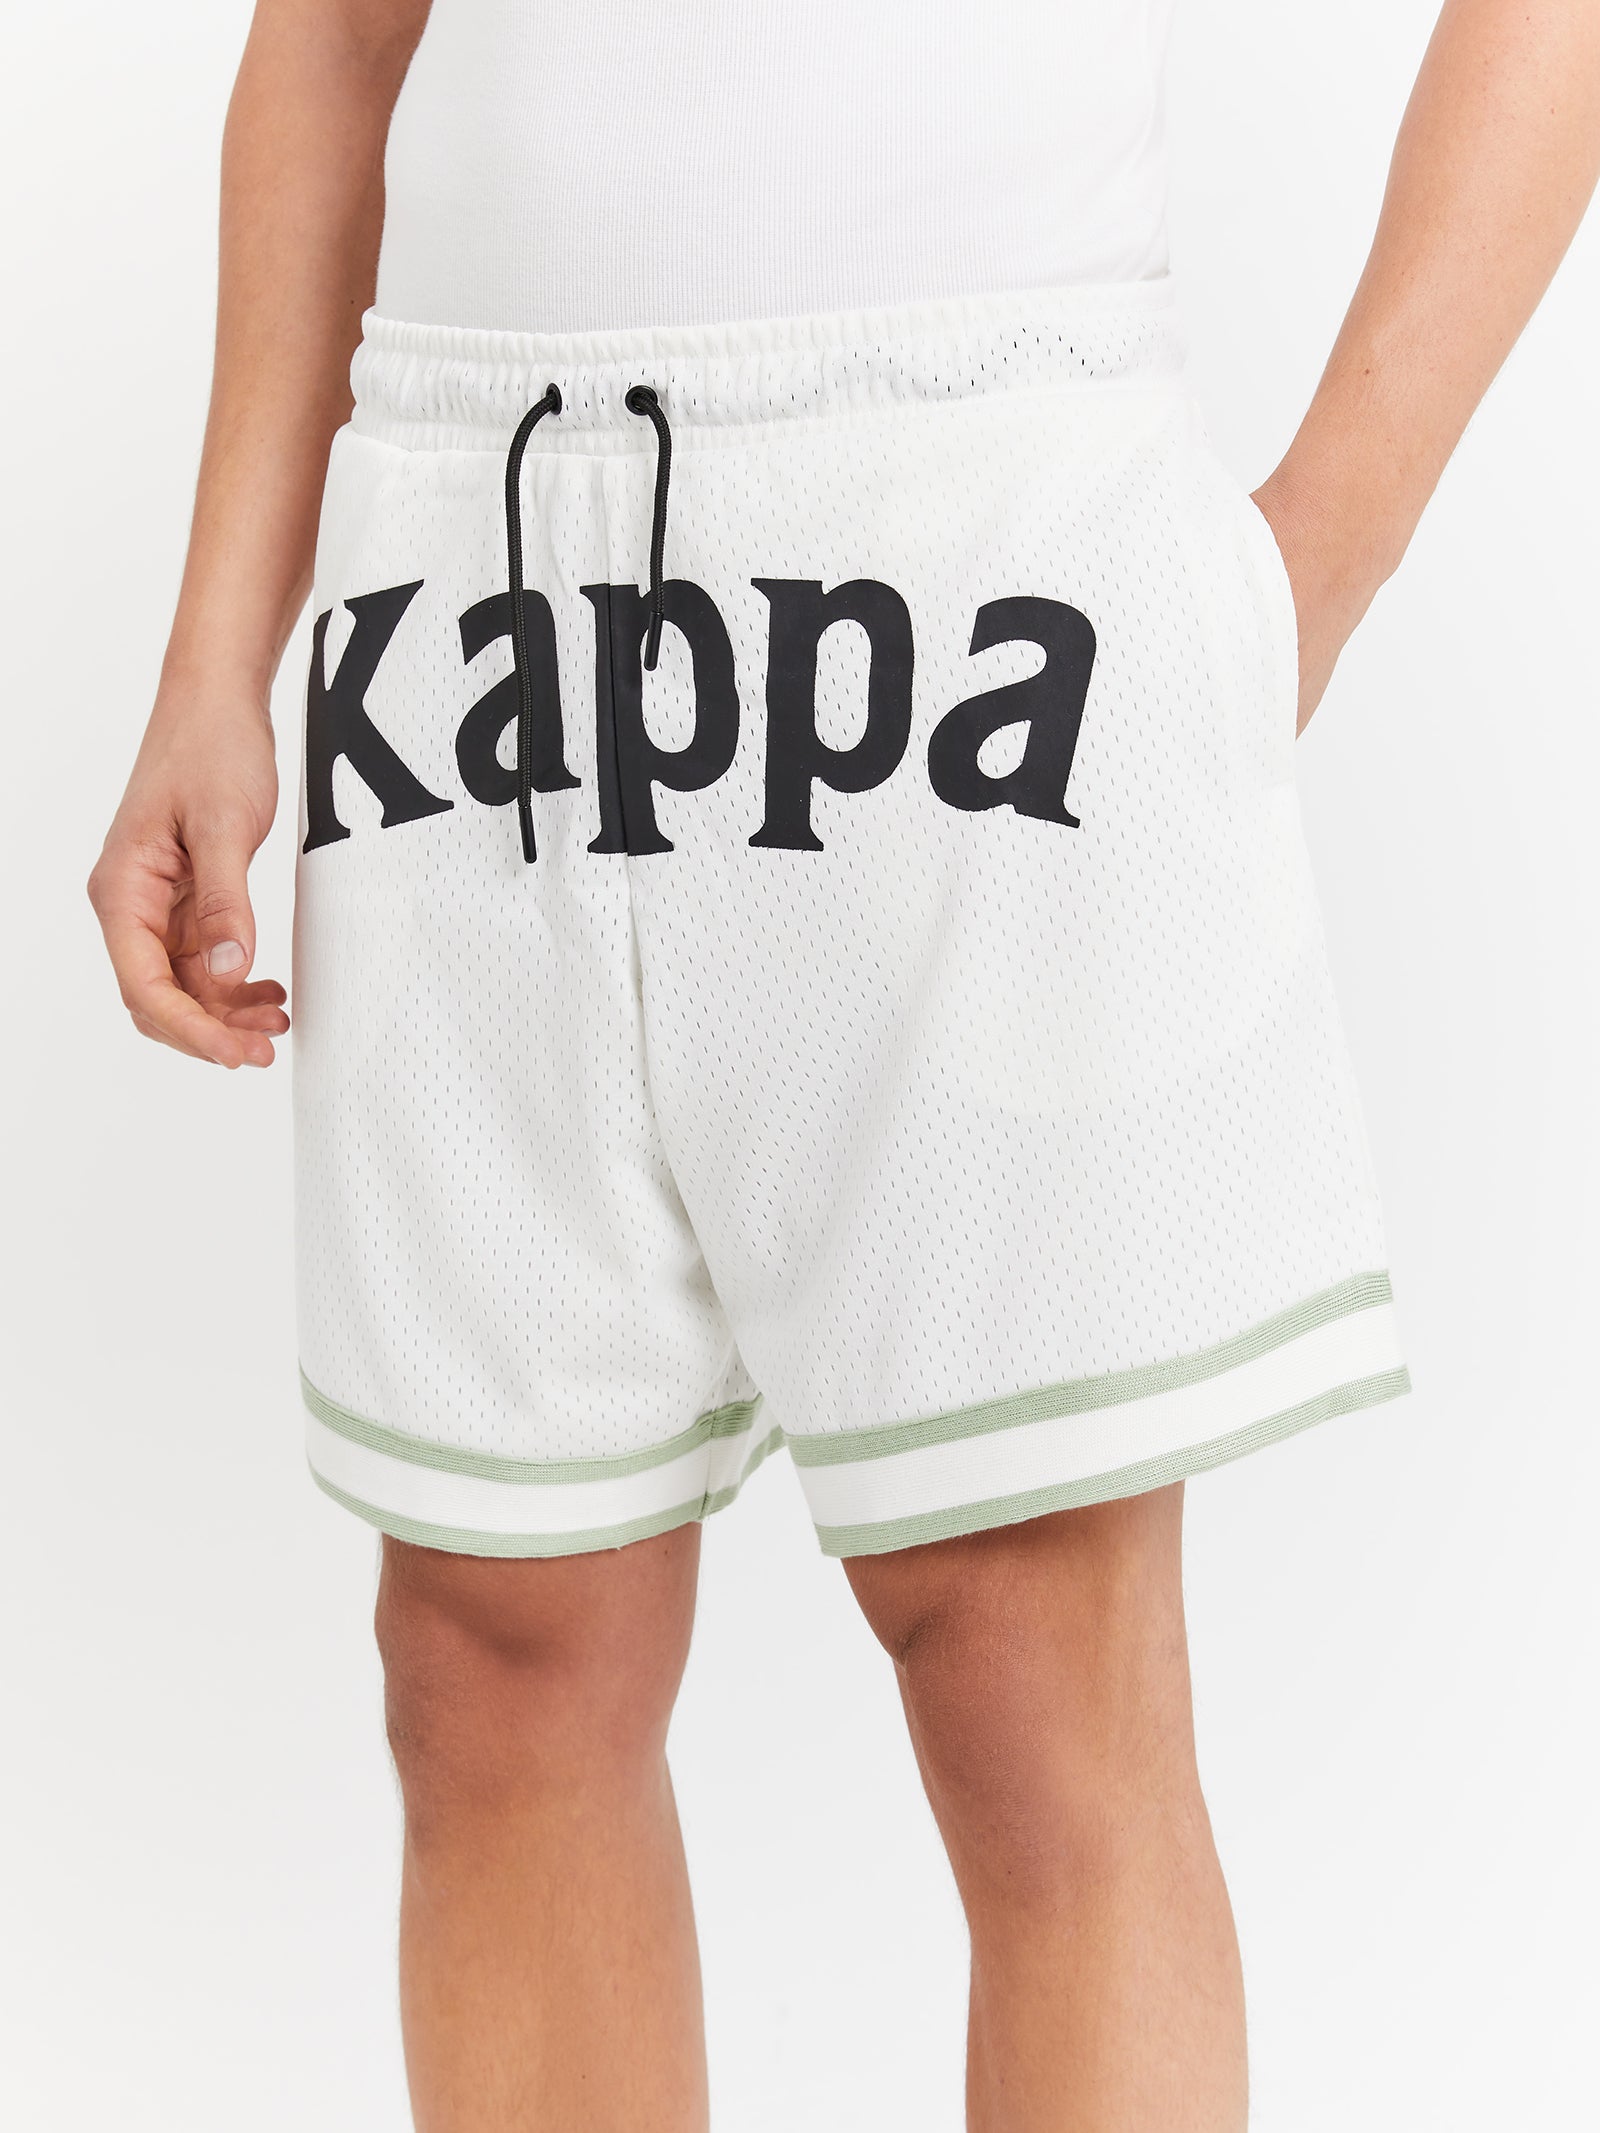 Authentic Dave Shorts in White Bright & Green - Glue Store